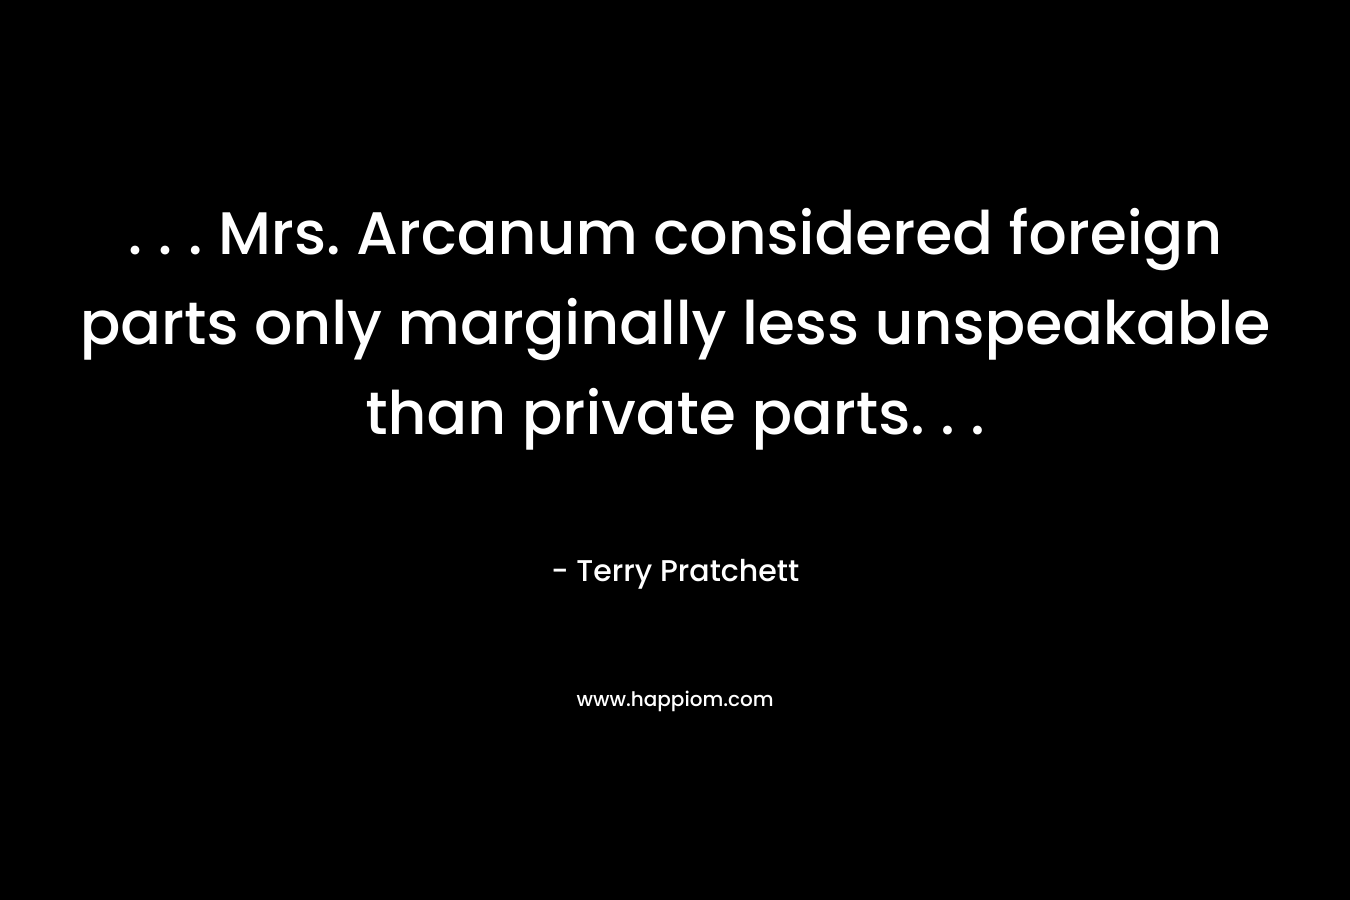 . . . Mrs. Arcanum considered foreign parts only marginally less unspeakable than private parts. . .